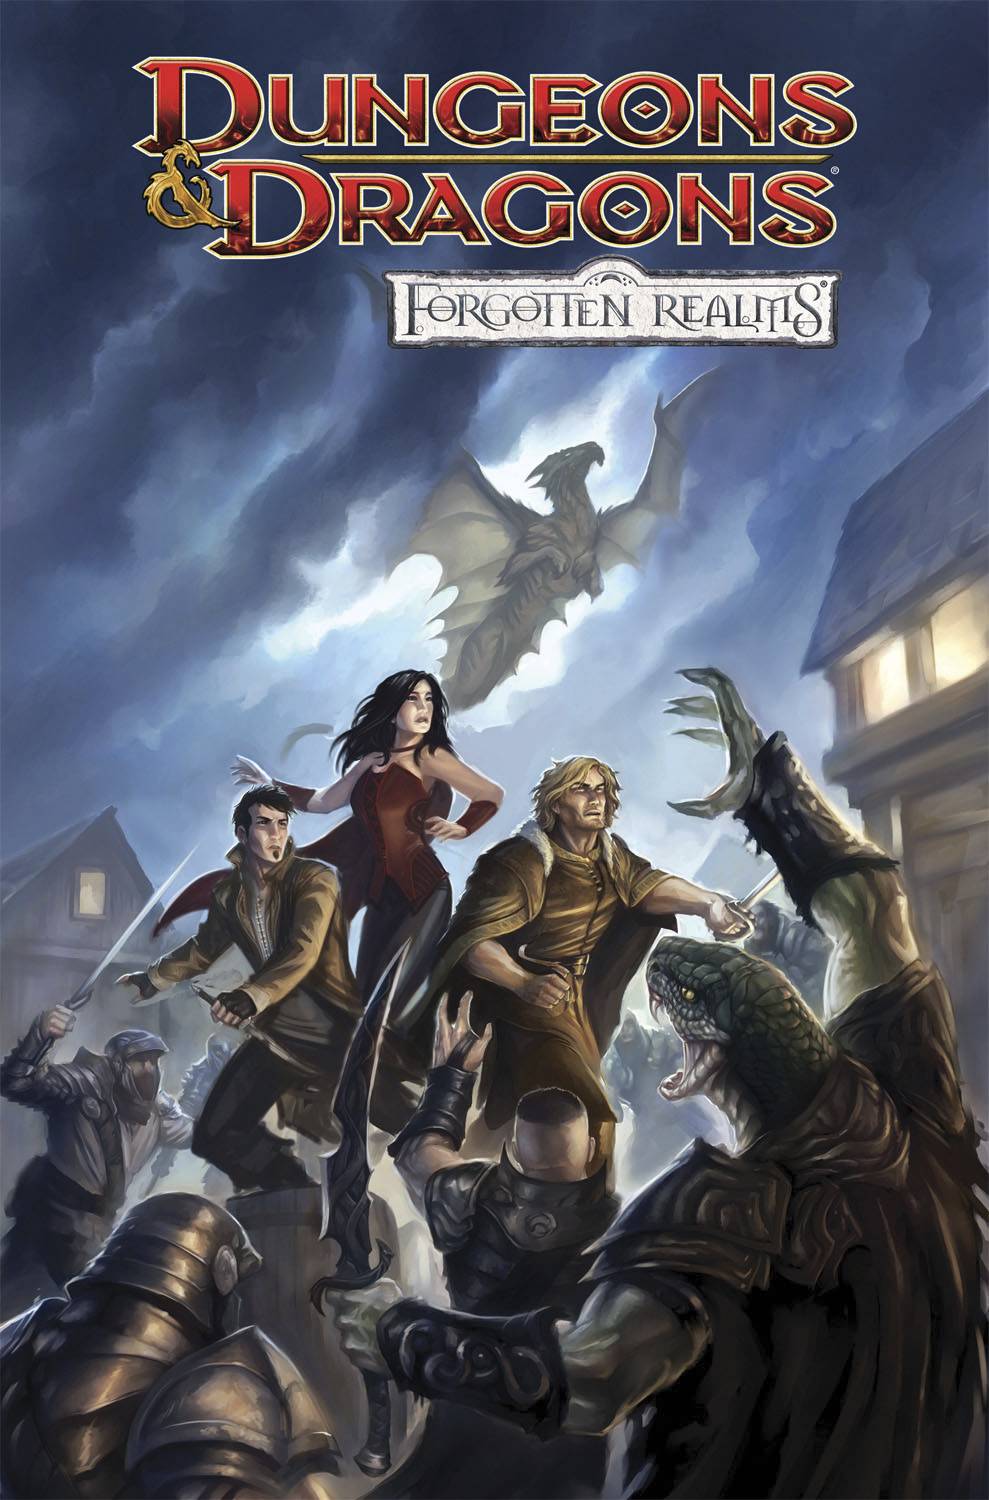 Dungeons & Dragons Forgotten Realms Hardcover Volume 1